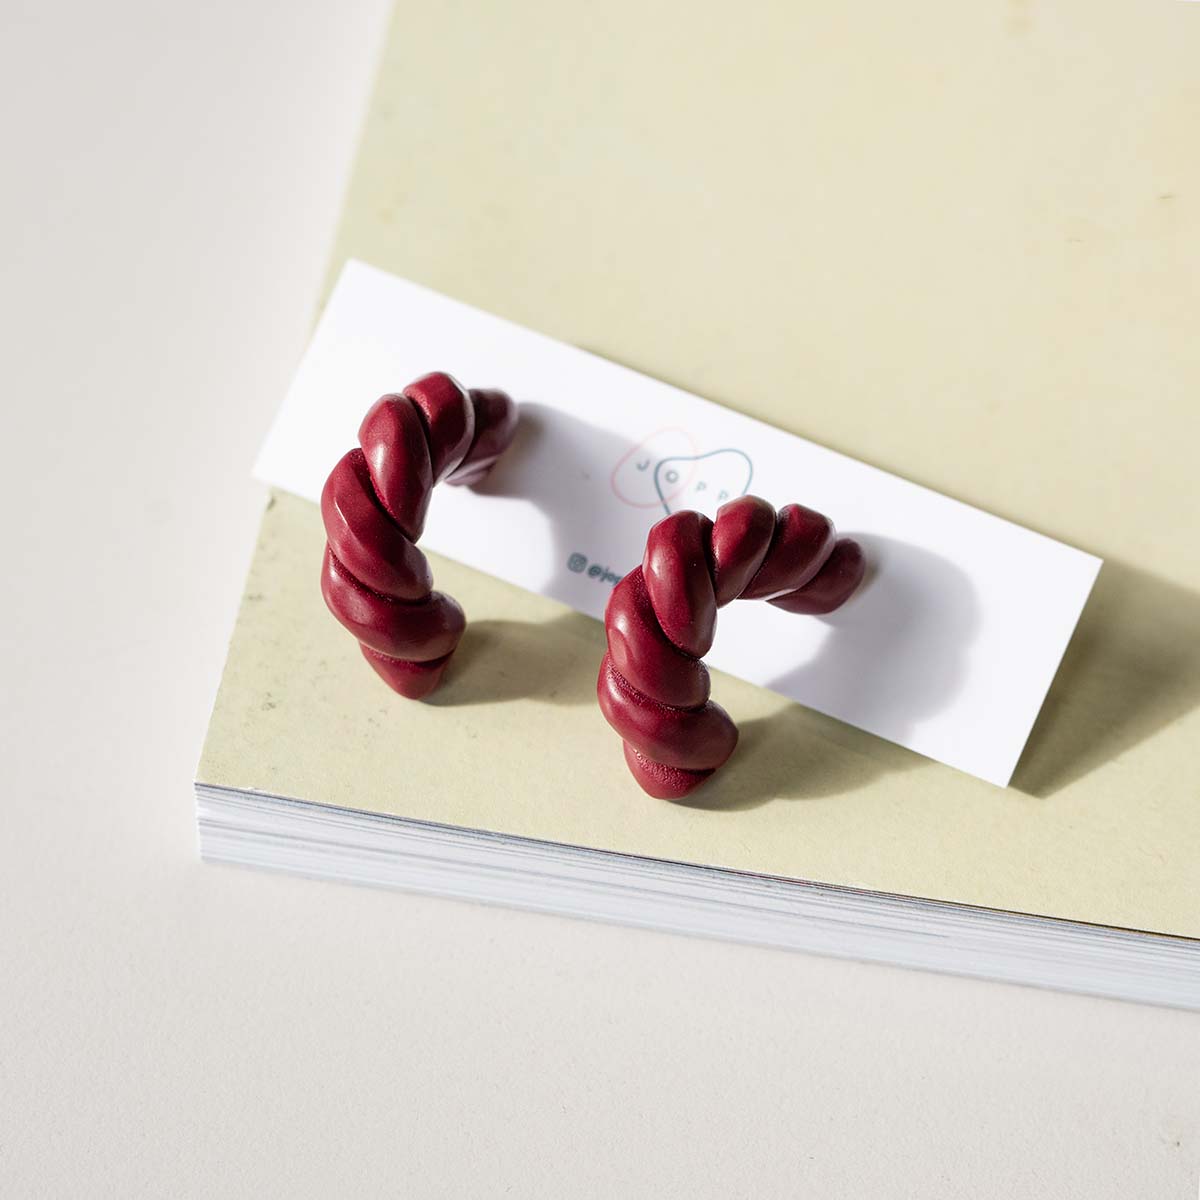 Maroon twisted polymer clay earrings photographed on a book